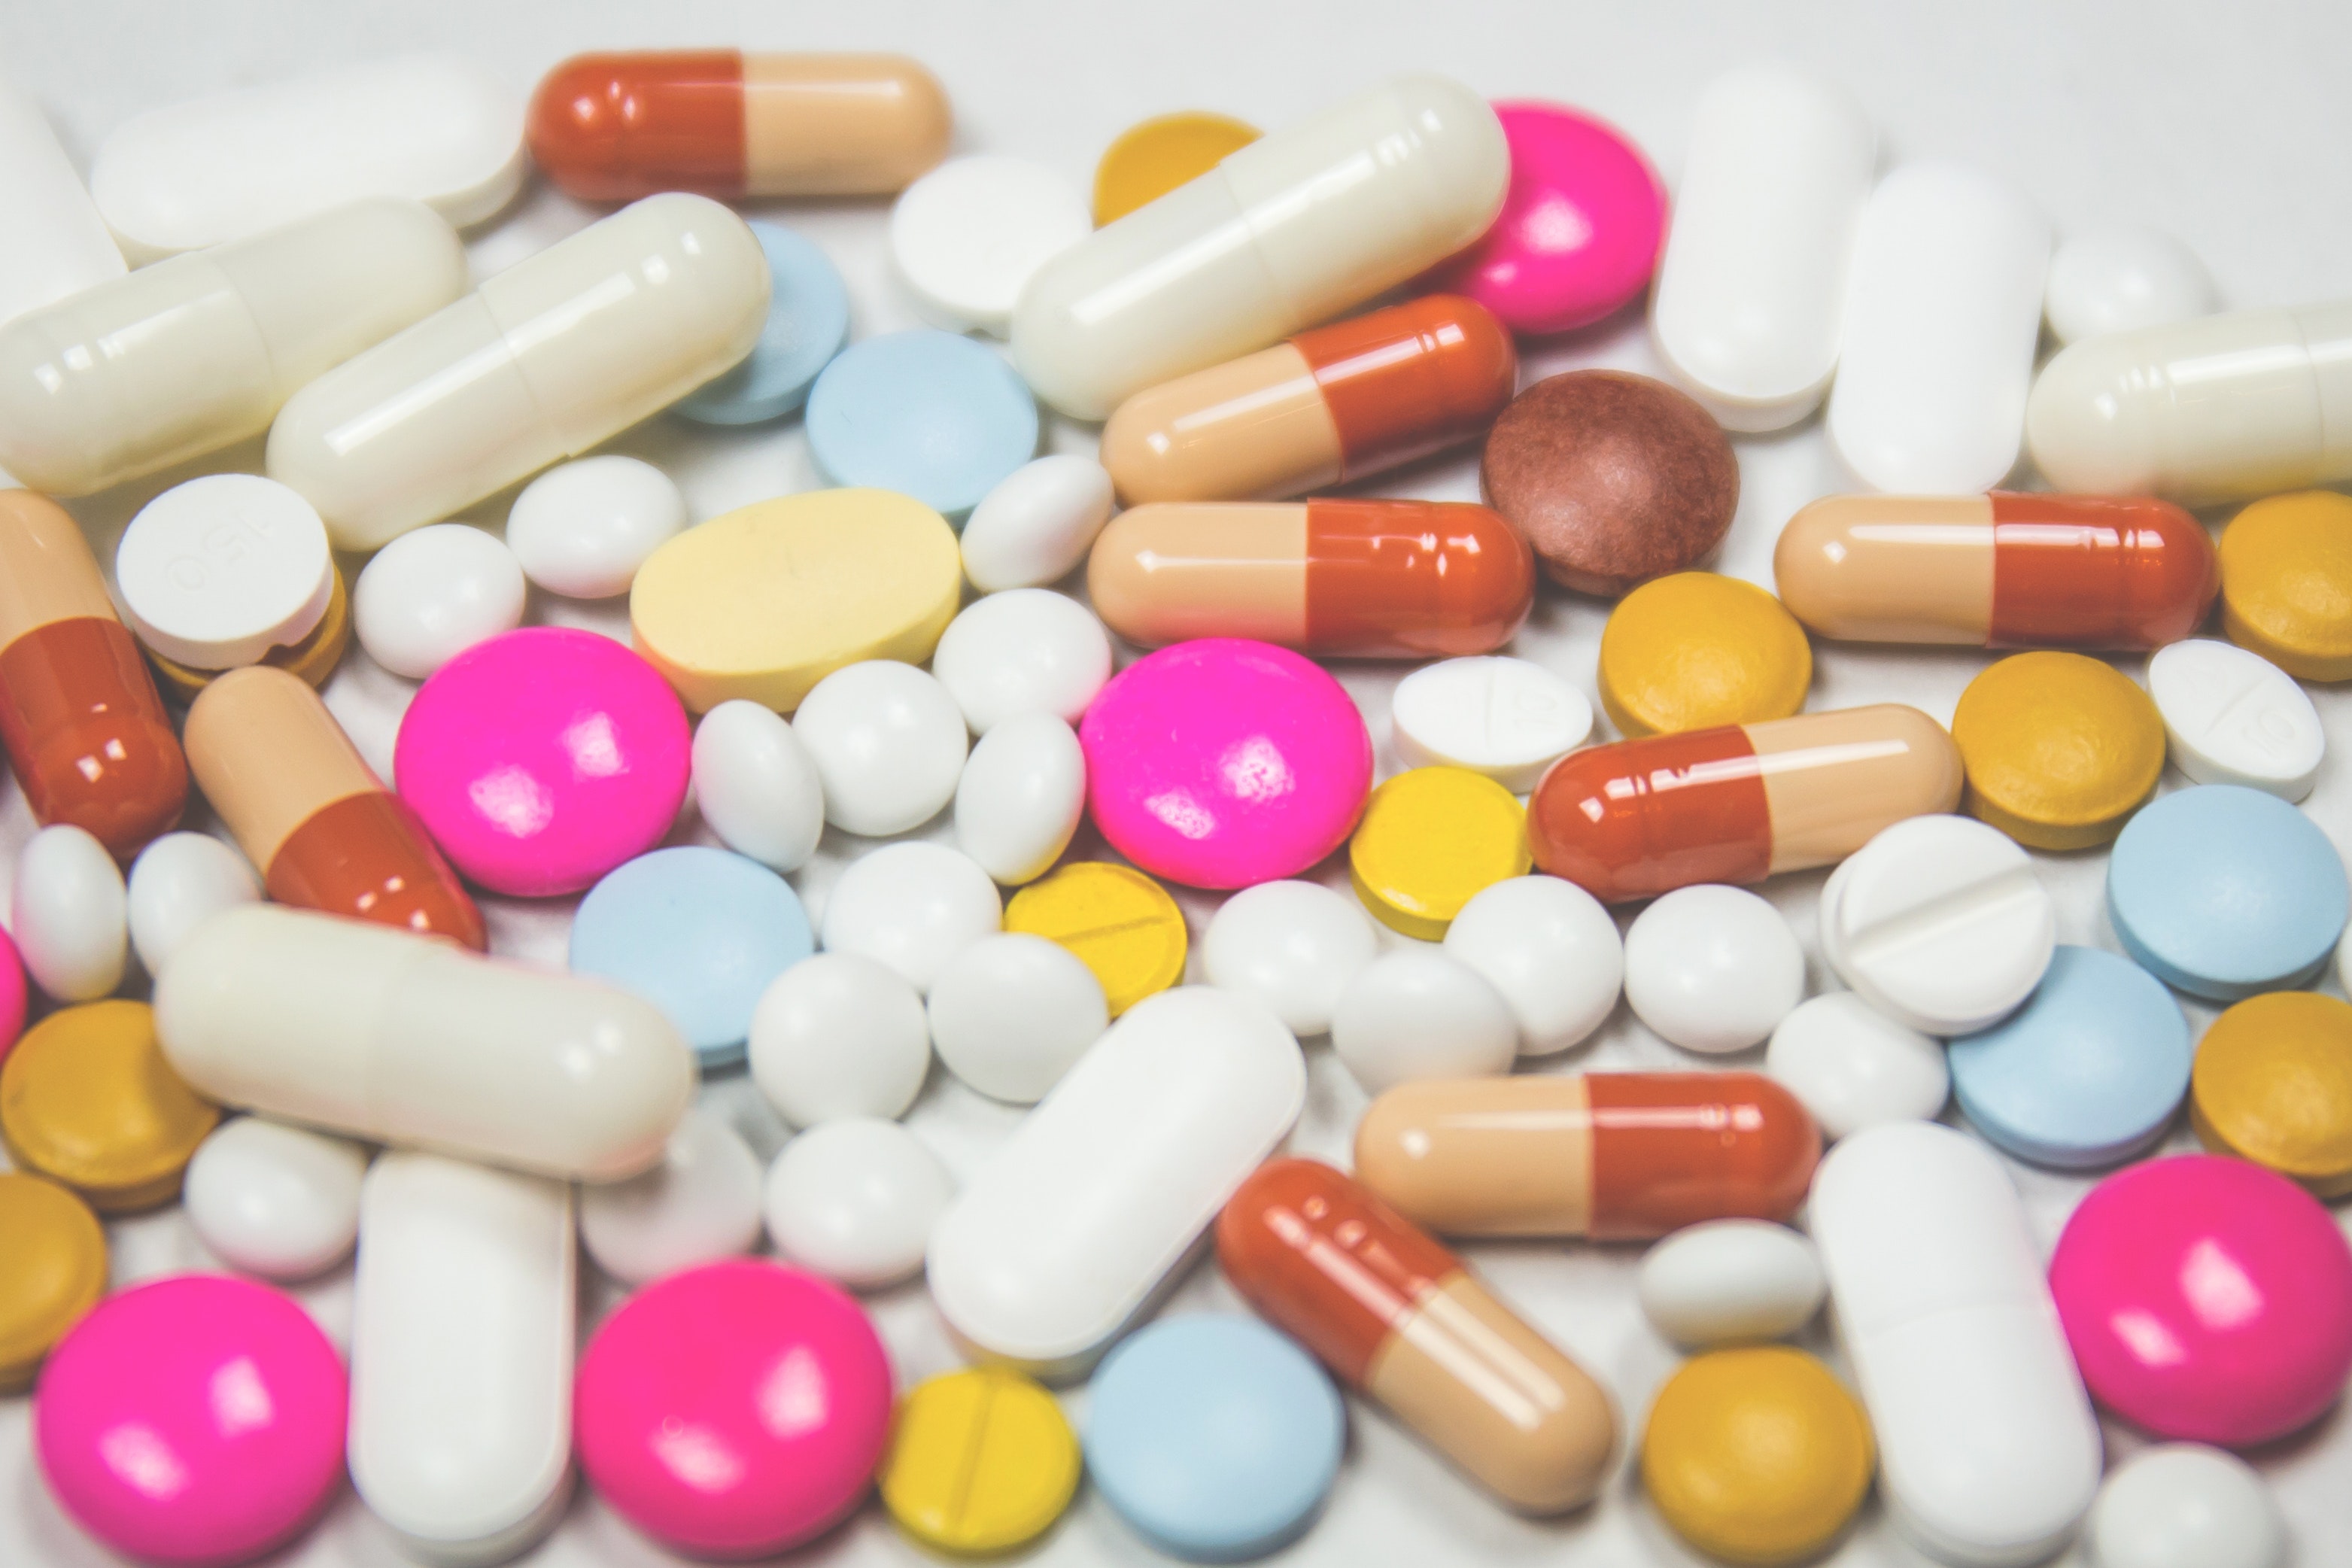 Prescription pills and tablets Photo by freestocks.org from Pexels Copy